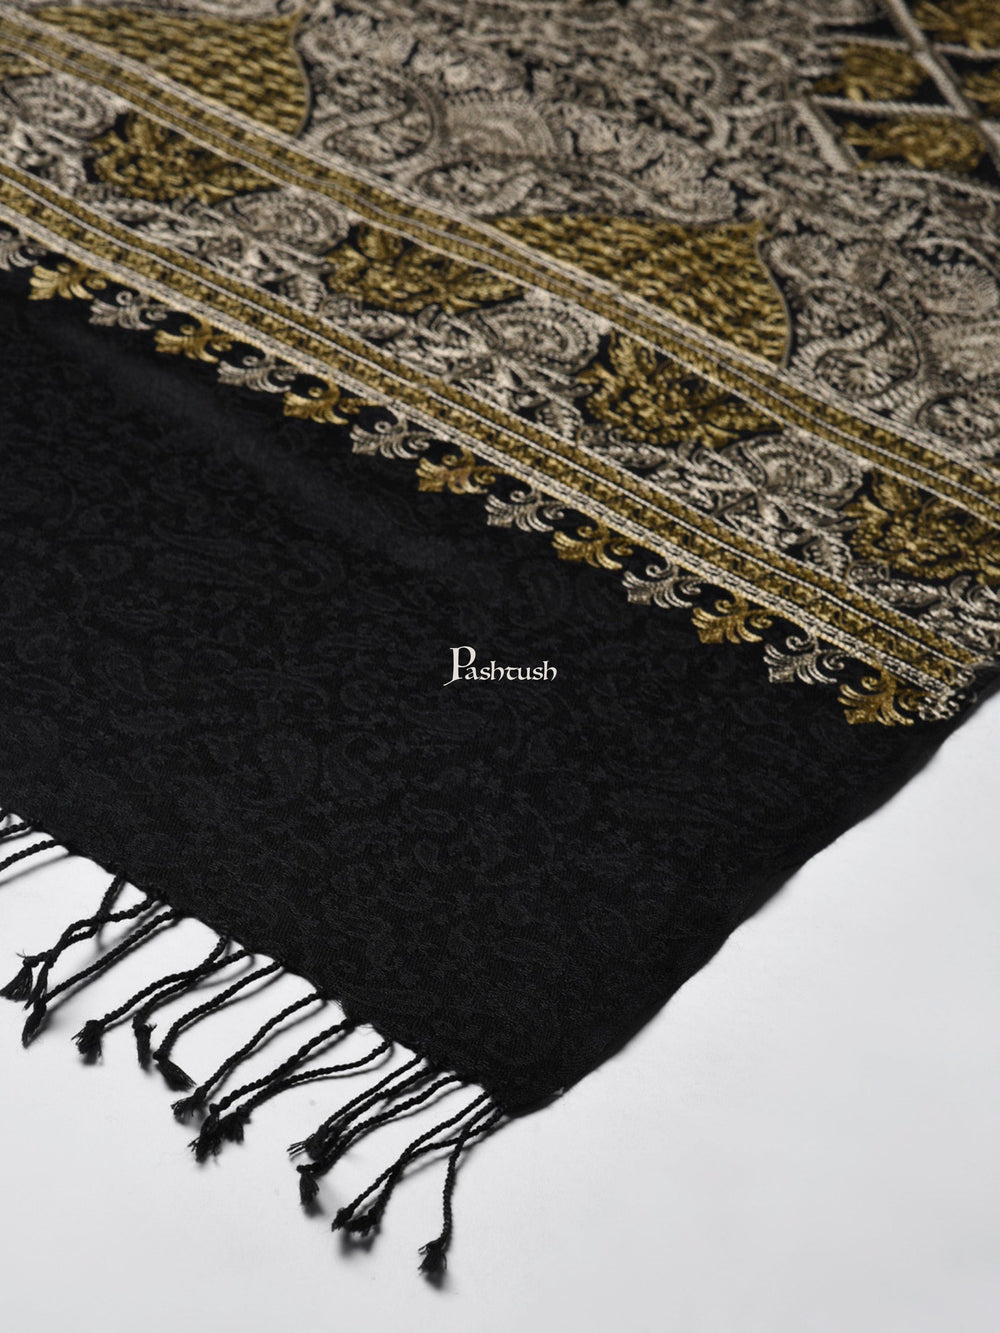 Pashtush India Womens Stoles and Scarves Scarf Pashtush Womens Fine Wool Stole With Nalki Embroidery, Black